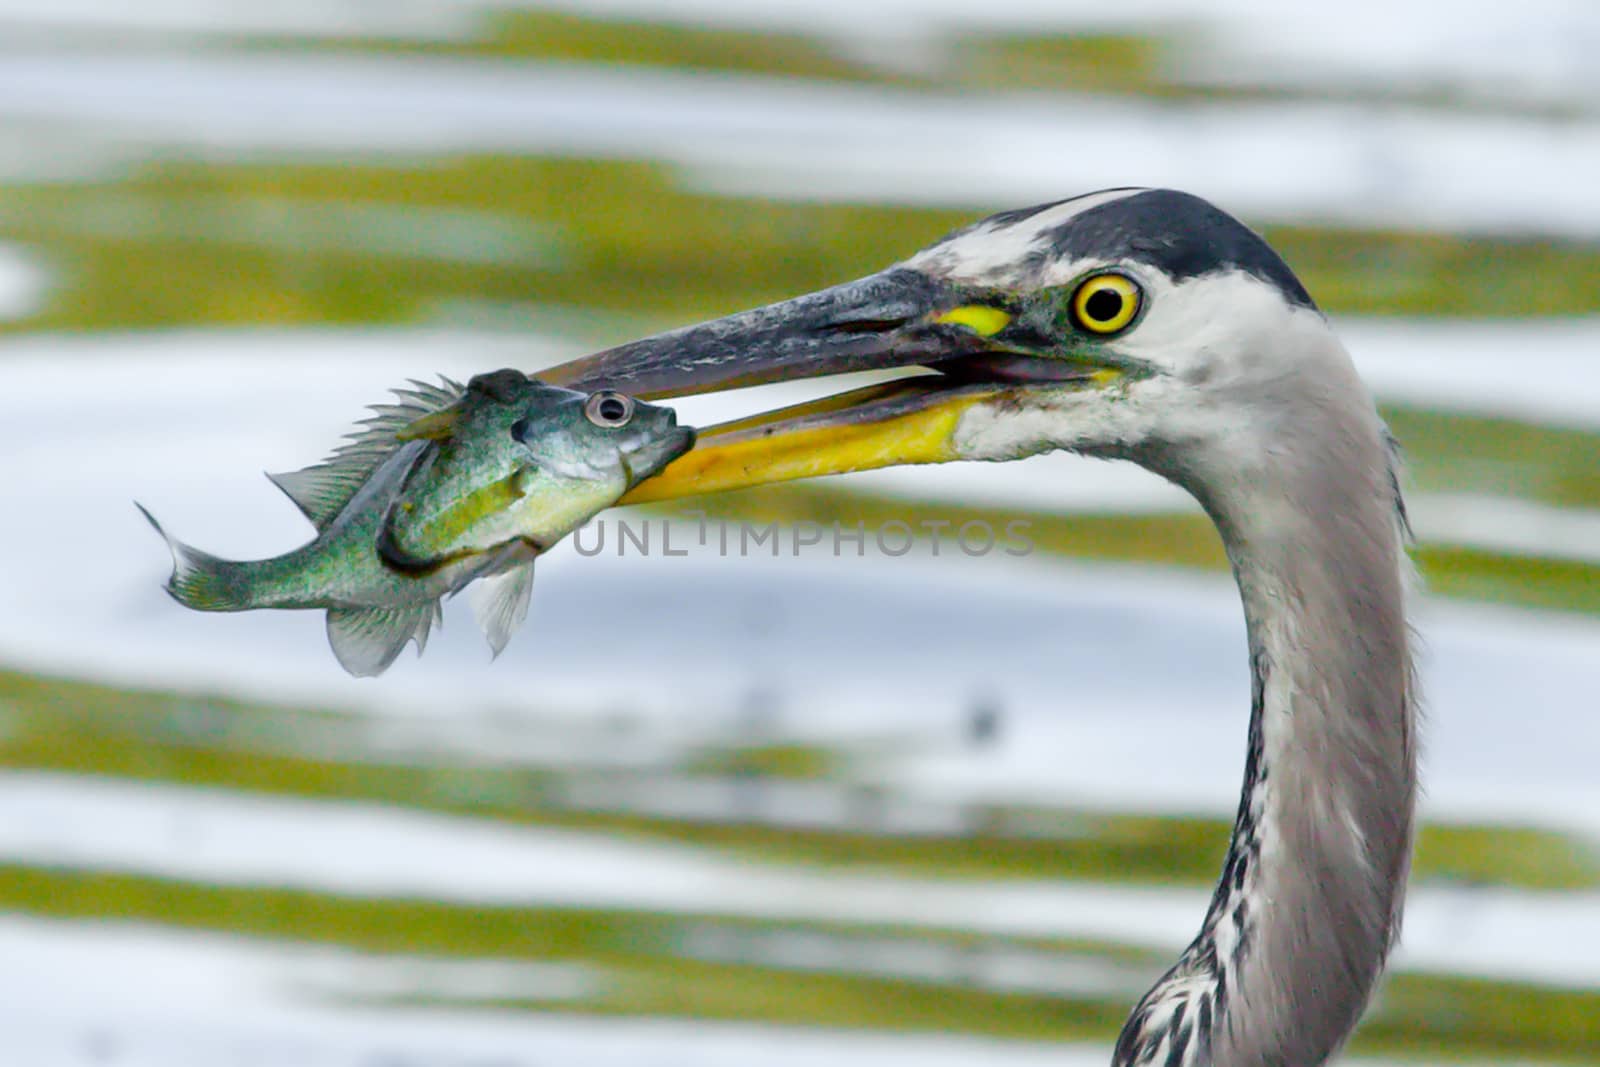 Bluegill gets Caught by a Great Blue Heron in soft focus